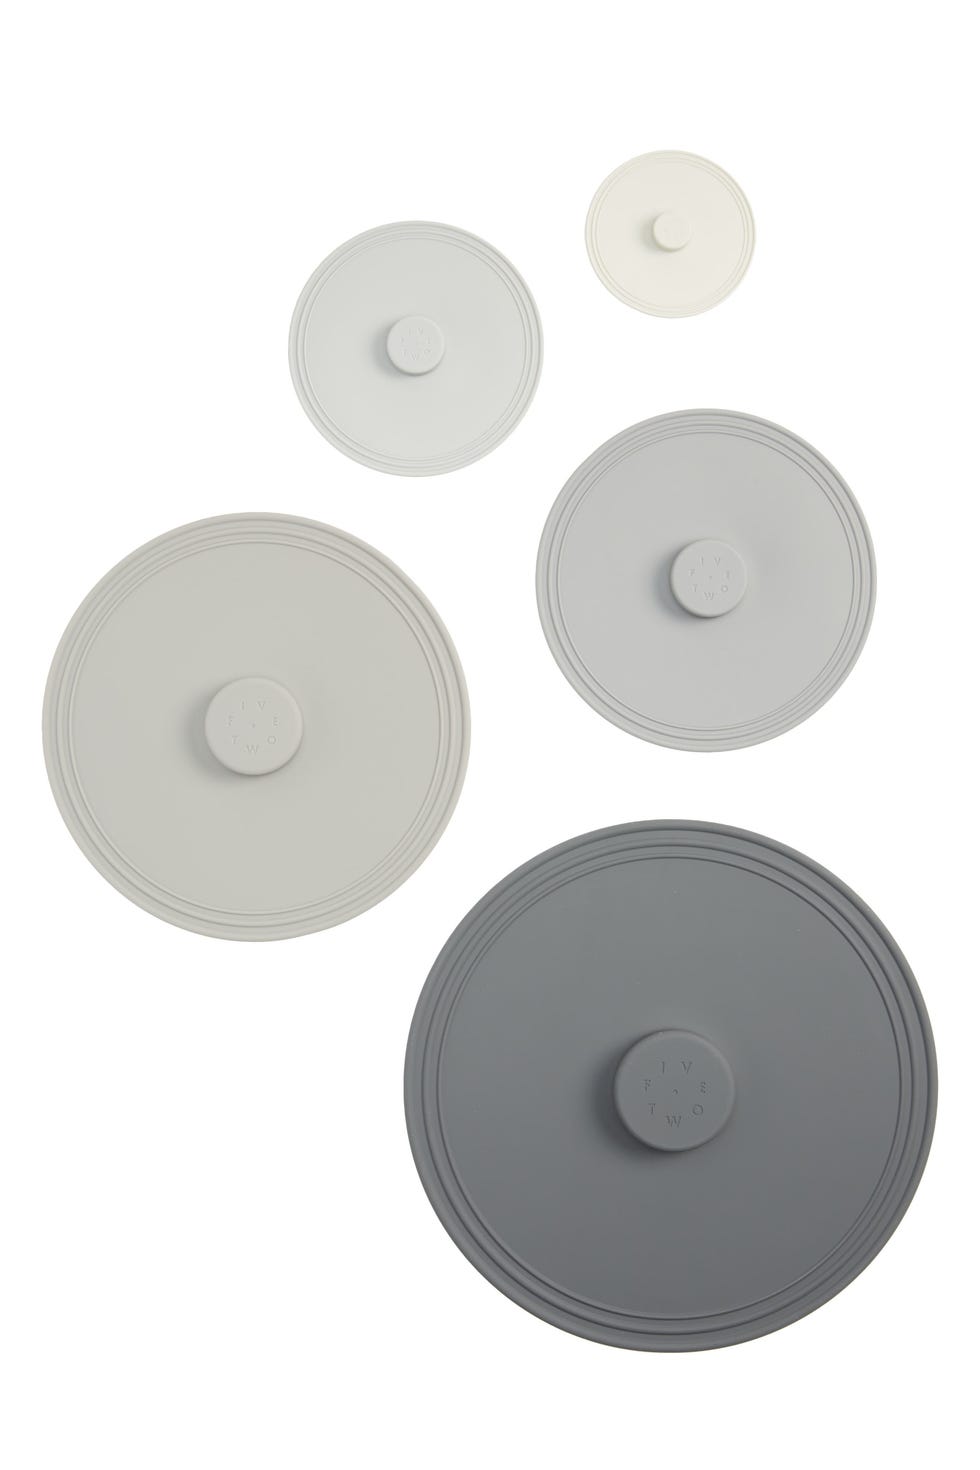 Pack of 5 Assorted Airtight Silicone Lids